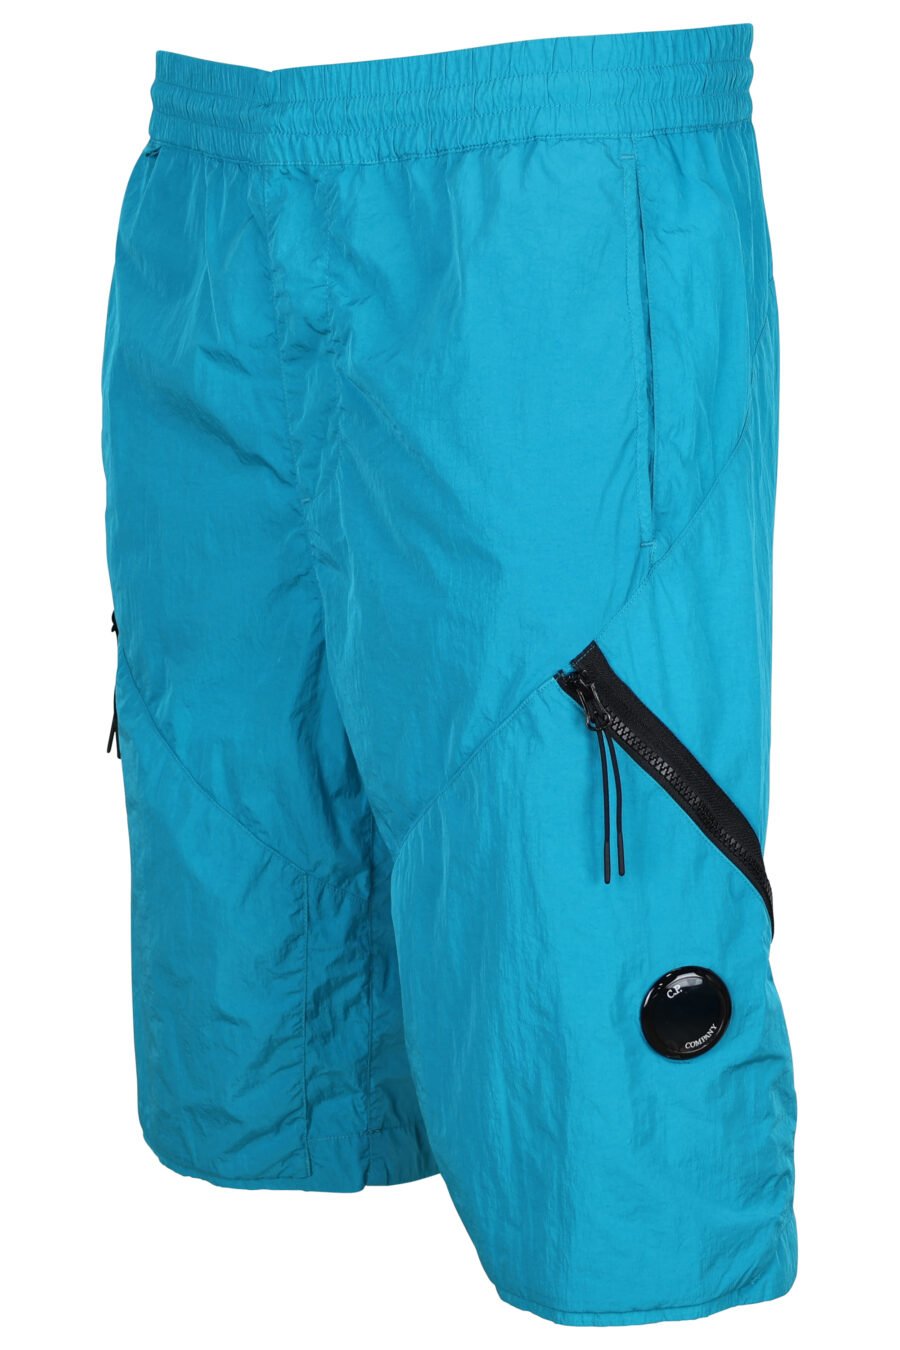 Turquoise blue shorts with diagonal zip and lens logo - 7620943384529 1